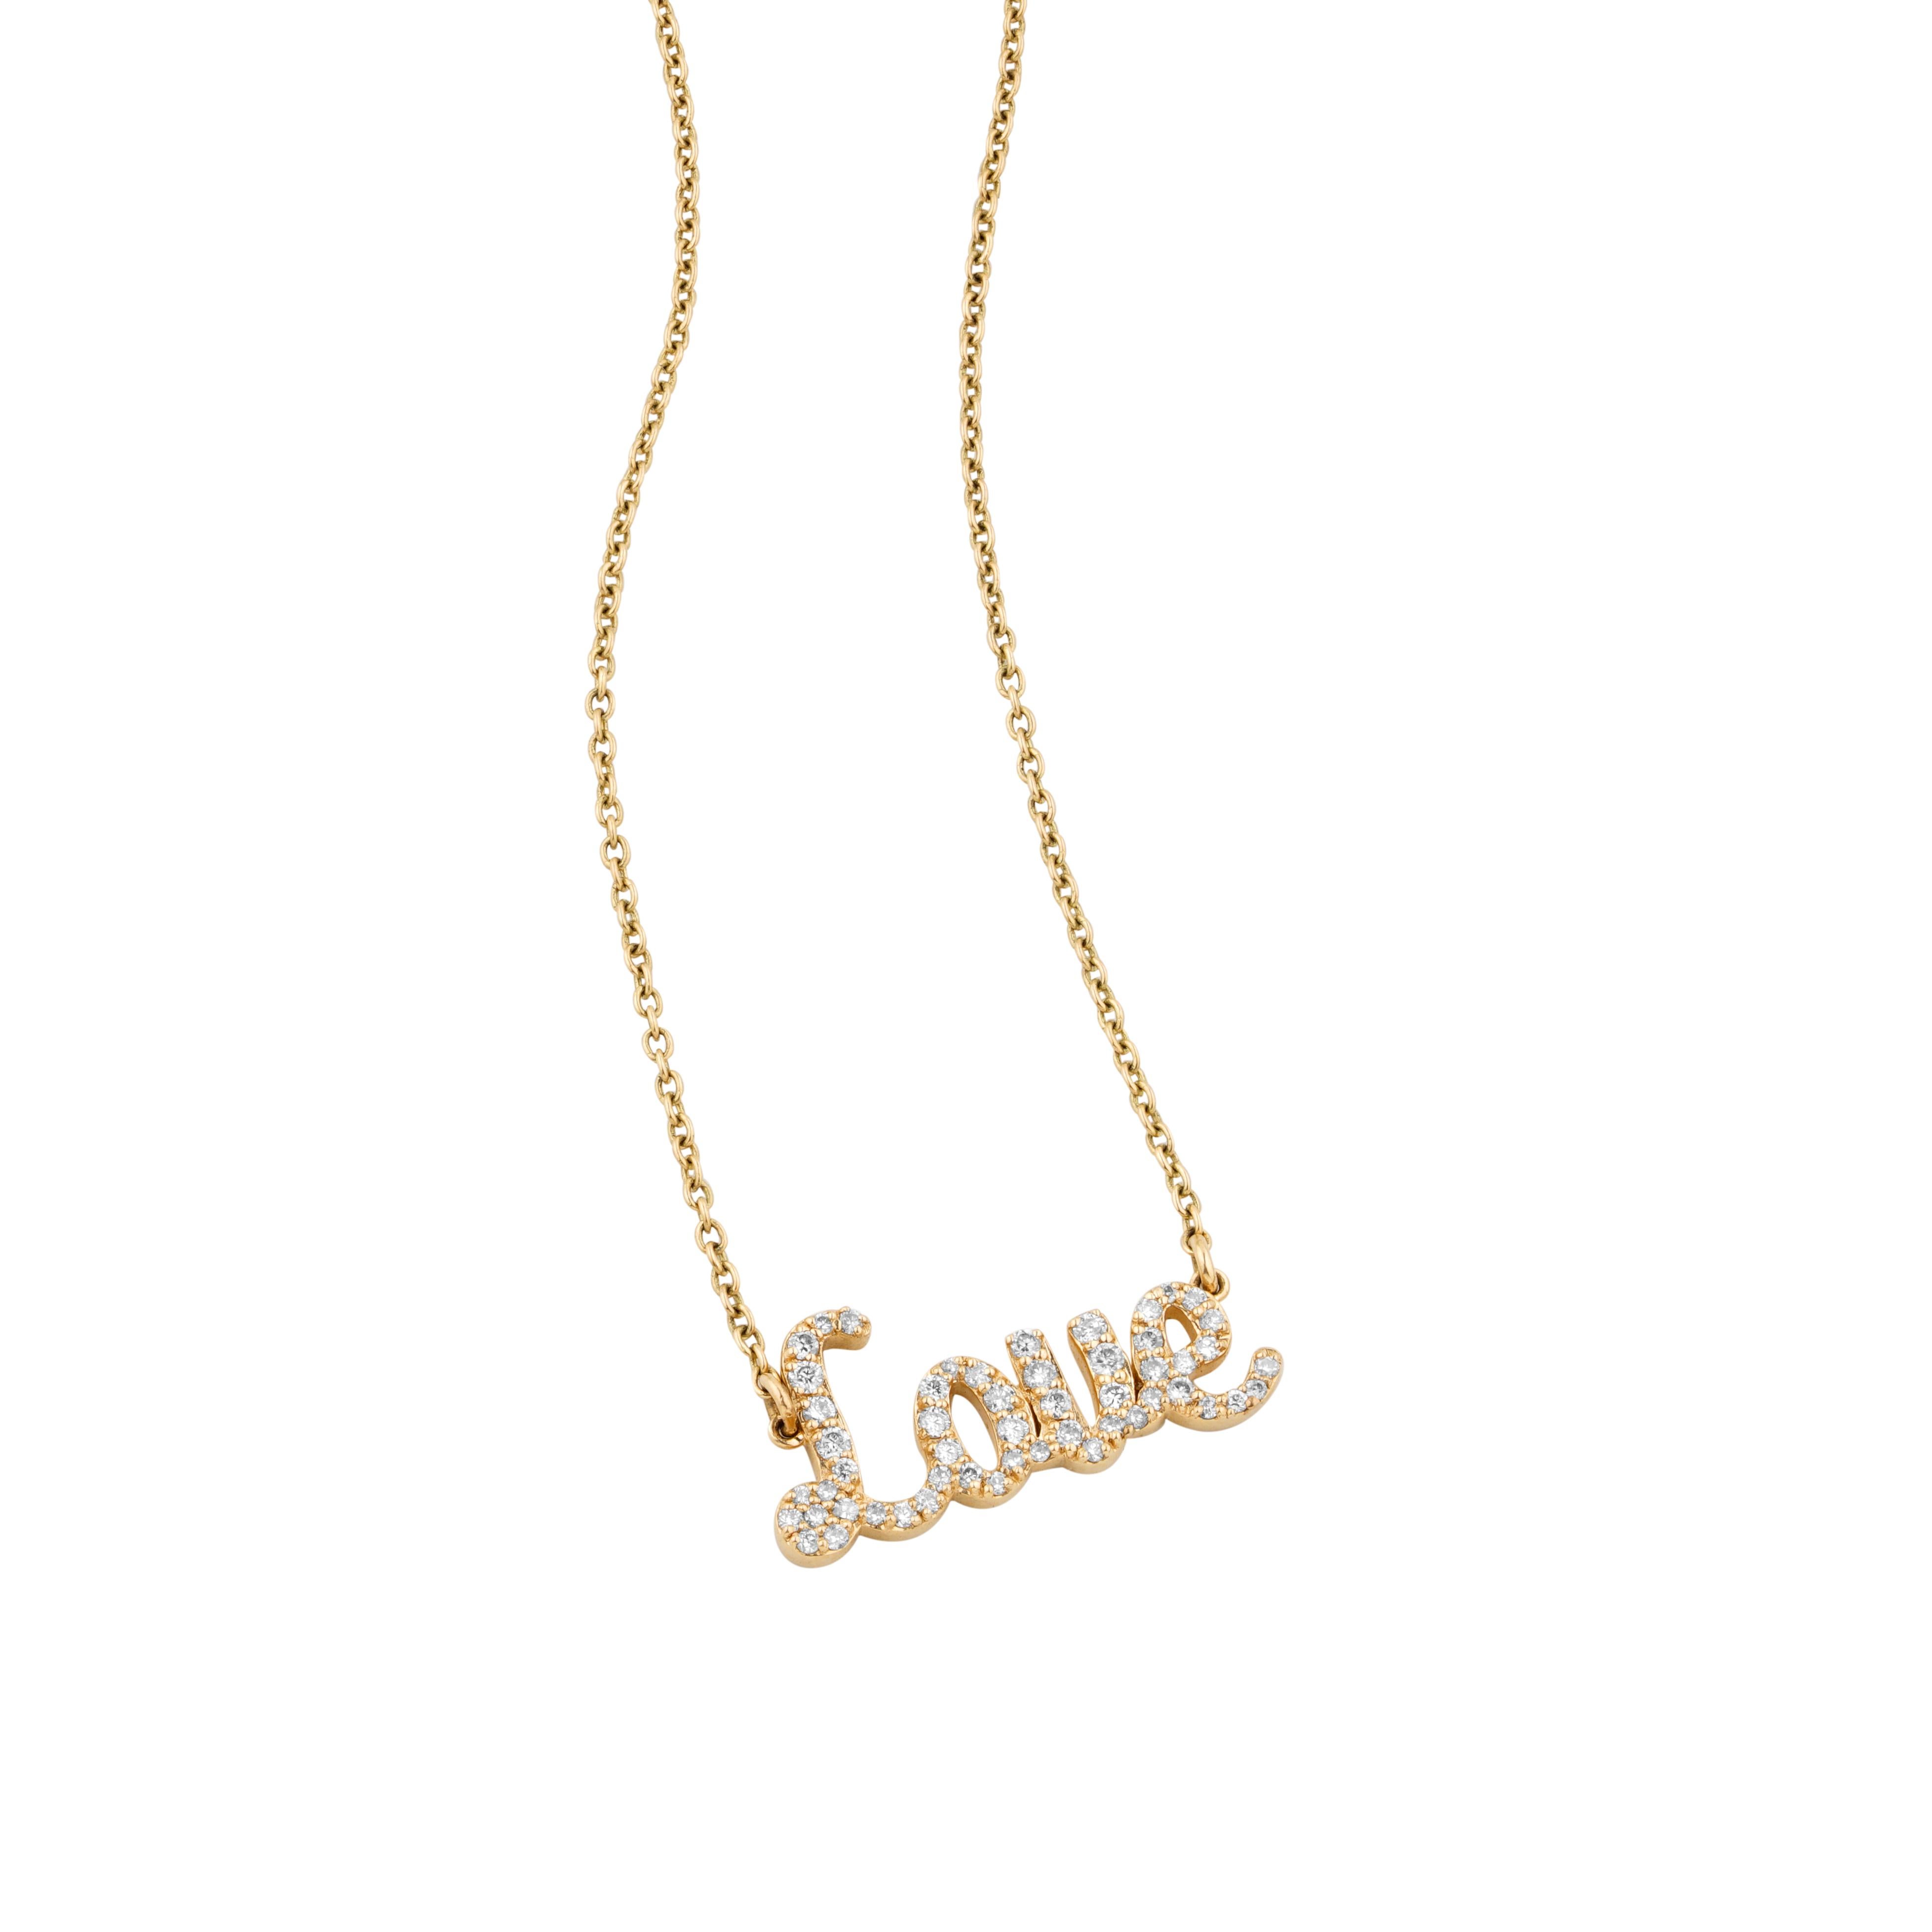 The Diamond Love Pendant Necklace
This enchanting 'Love' pendant necklace, graced with a golden sheen and encrusted with scintillating diamonds, is a true representation of timeless romance. The cursive elegance of the word 'Love' is brought to life